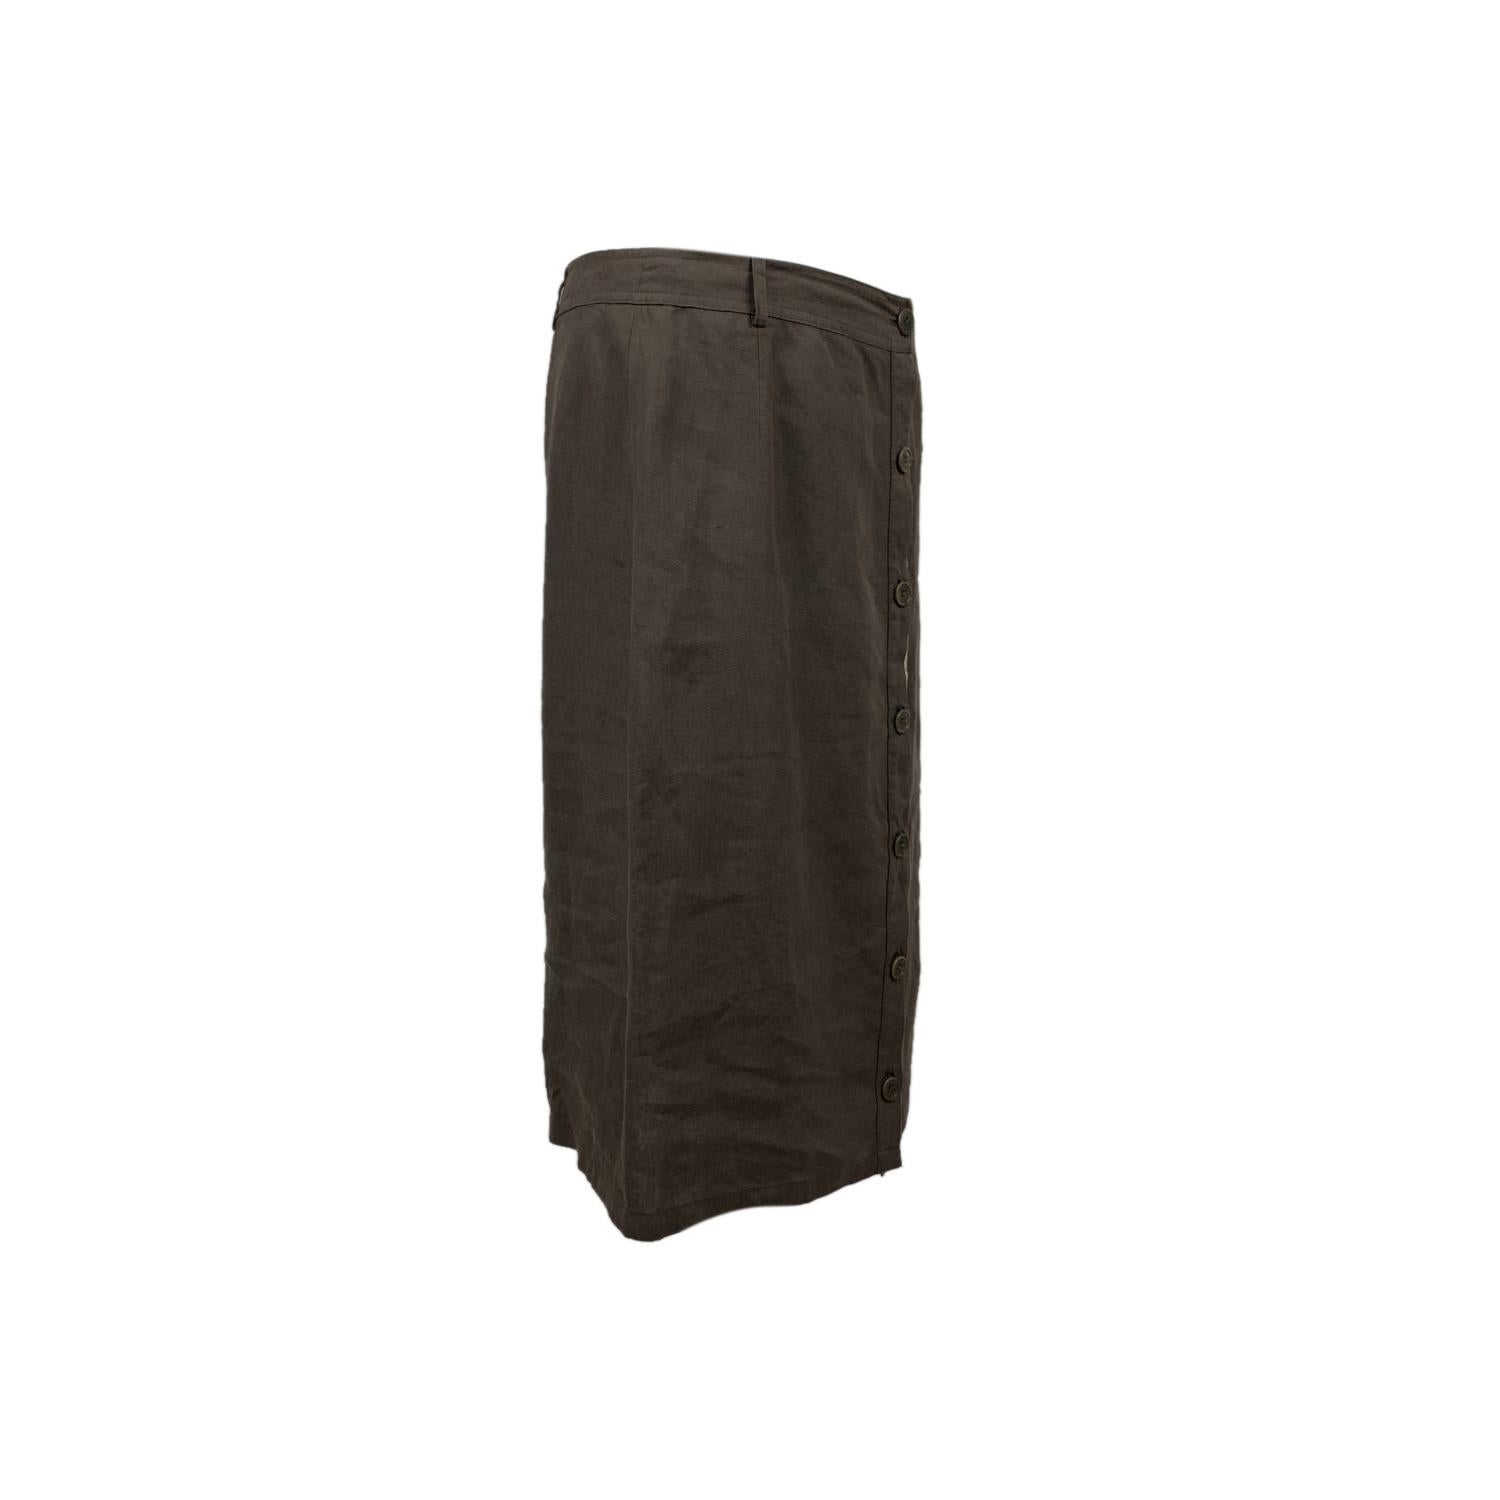 Burberry military green pencil skirt. It features button through closure and belt loops. Composition is not indicated; it seems to be linen. Color/Effect: Military Green. Size: 48 IT, 14 USA, 44 GER, FRA 46 (The size shown for this item is the size